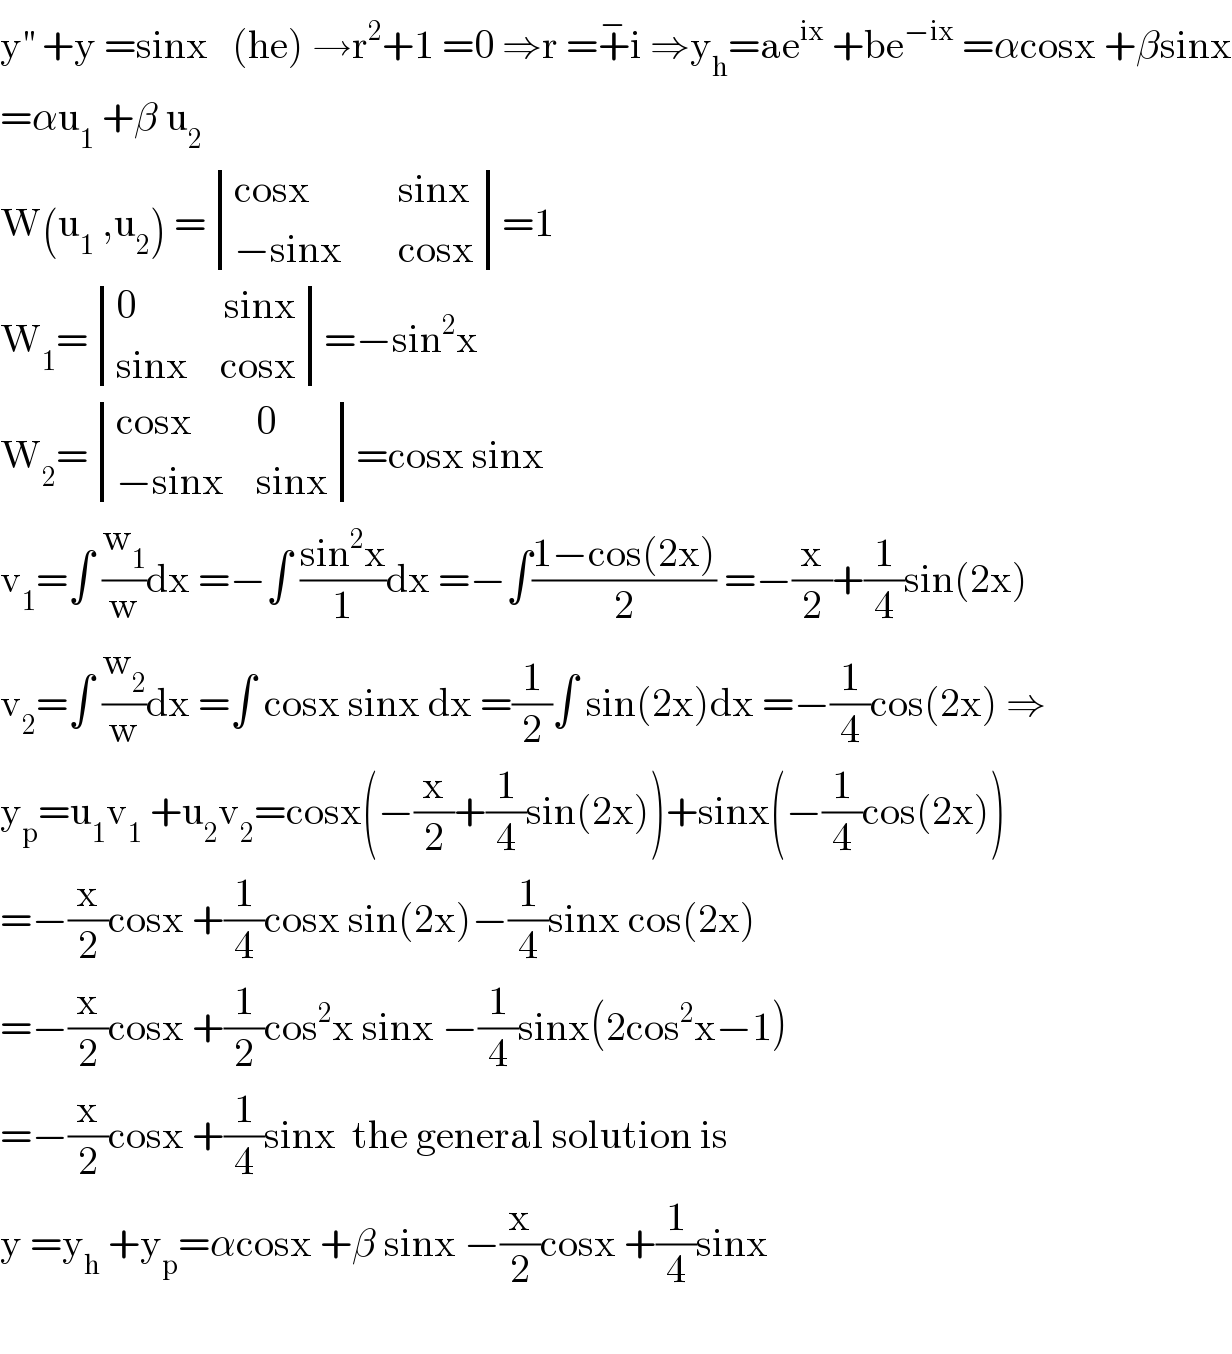 y^(′′)  +y =sinx   (he) →r^2 +1 =0 ⇒r =+^− i ⇒y_h =ae^(ix)  +be^(−ix)  =αcosx +βsinx  =αu_1  +β u_2   W(u_1  ,u_2 ) = determinant (((cosx           sinx)),((−sinx       cosx)))=1  W_1 = determinant (((0           sinx)),((sinx    cosx)))=−sin^2 x  W_2 = determinant (((cosx        0)),((−sinx    sinx)))=cosx sinx  v_1 =∫ (w_1 /w)dx =−∫ ((sin^2 x)/1)dx =−∫((1−cos(2x))/2) =−(x/2)+(1/4)sin(2x)  v_2 =∫ (w_2 /w)dx =∫ cosx sinx dx =(1/2)∫ sin(2x)dx =−(1/4)cos(2x) ⇒  y_p =u_1 v_1  +u_2 v_2 =cosx(−(x/2)+(1/4)sin(2x))+sinx(−(1/4)cos(2x))  =−(x/2)cosx +(1/4)cosx sin(2x)−(1/4)sinx cos(2x)  =−(x/2)cosx +(1/2)cos^2 x sinx −(1/4)sinx(2cos^2 x−1)  =−(x/2)cosx +(1/4)sinx  the general solution is  y =y_h  +y_p =αcosx +β sinx −(x/2)cosx +(1/4)sinx    